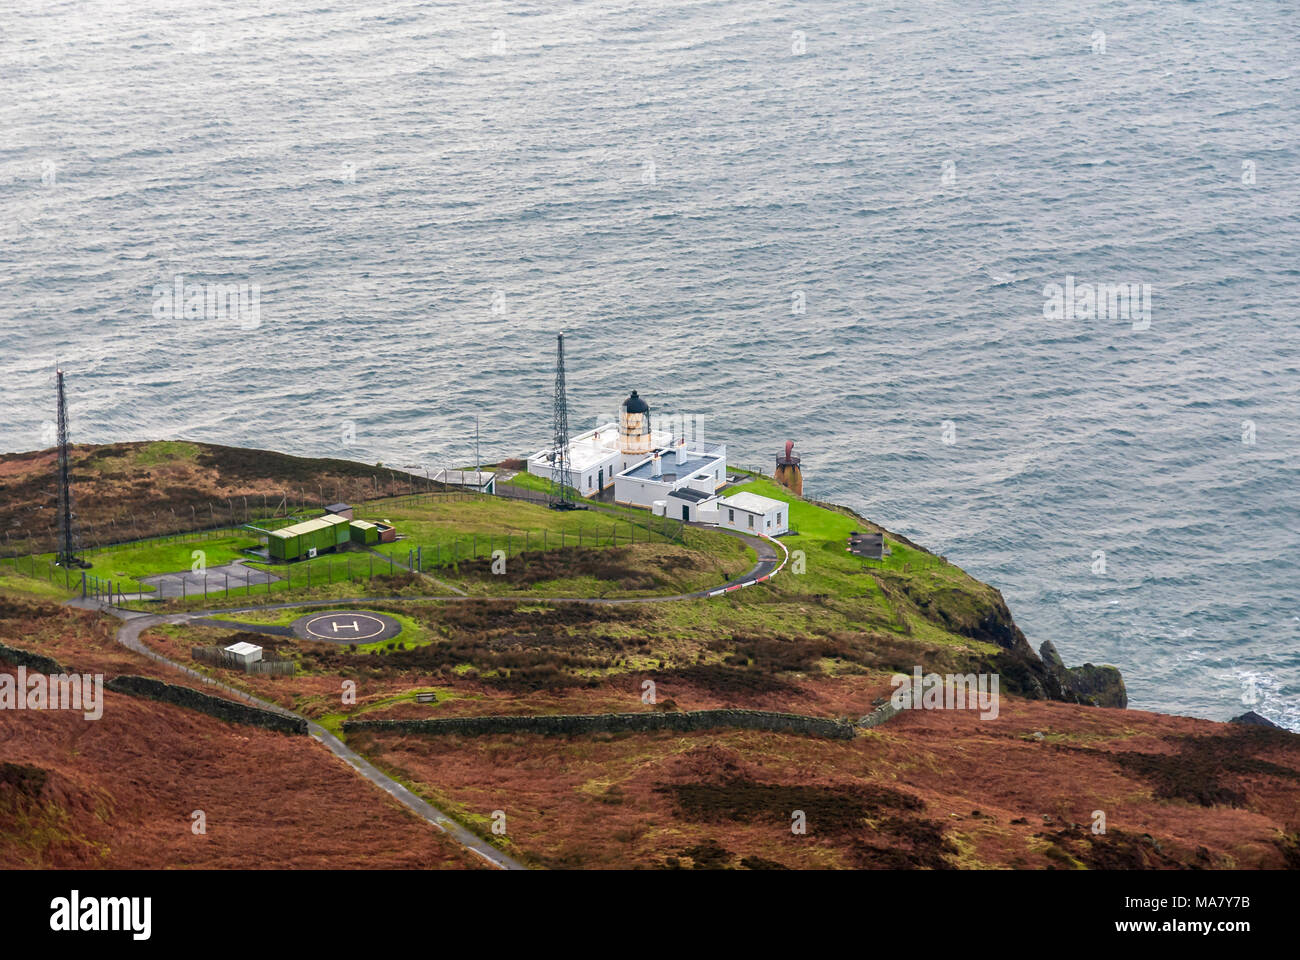 An aerial view of the Mull of Kintyre Lighthouse, Argyll and Bute, Scotland. 28 December 2006 Stock Photo